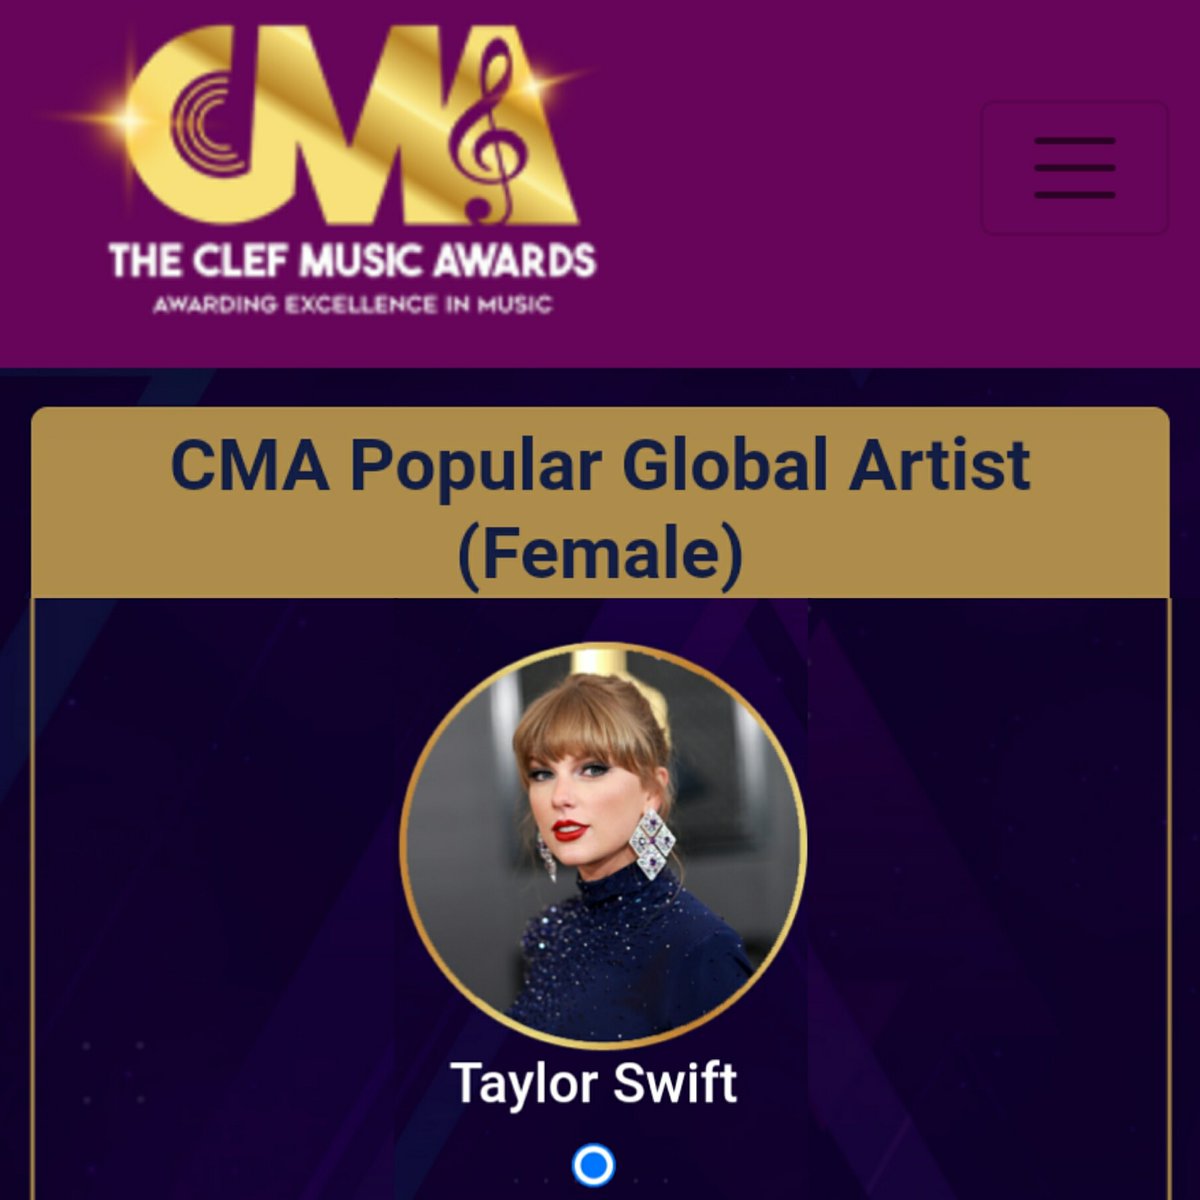 🚨 4 DAYS LEFT 🚨

Vote for @TaylorSwift13 for 'CMA Popular Global Artist (Female)' at the 'Clef Music Awards' in India. #CMA2023 🇮🇳 

Use your email, vote in every category and confirm your votes: radioandmusic.com/clefmusicaward…